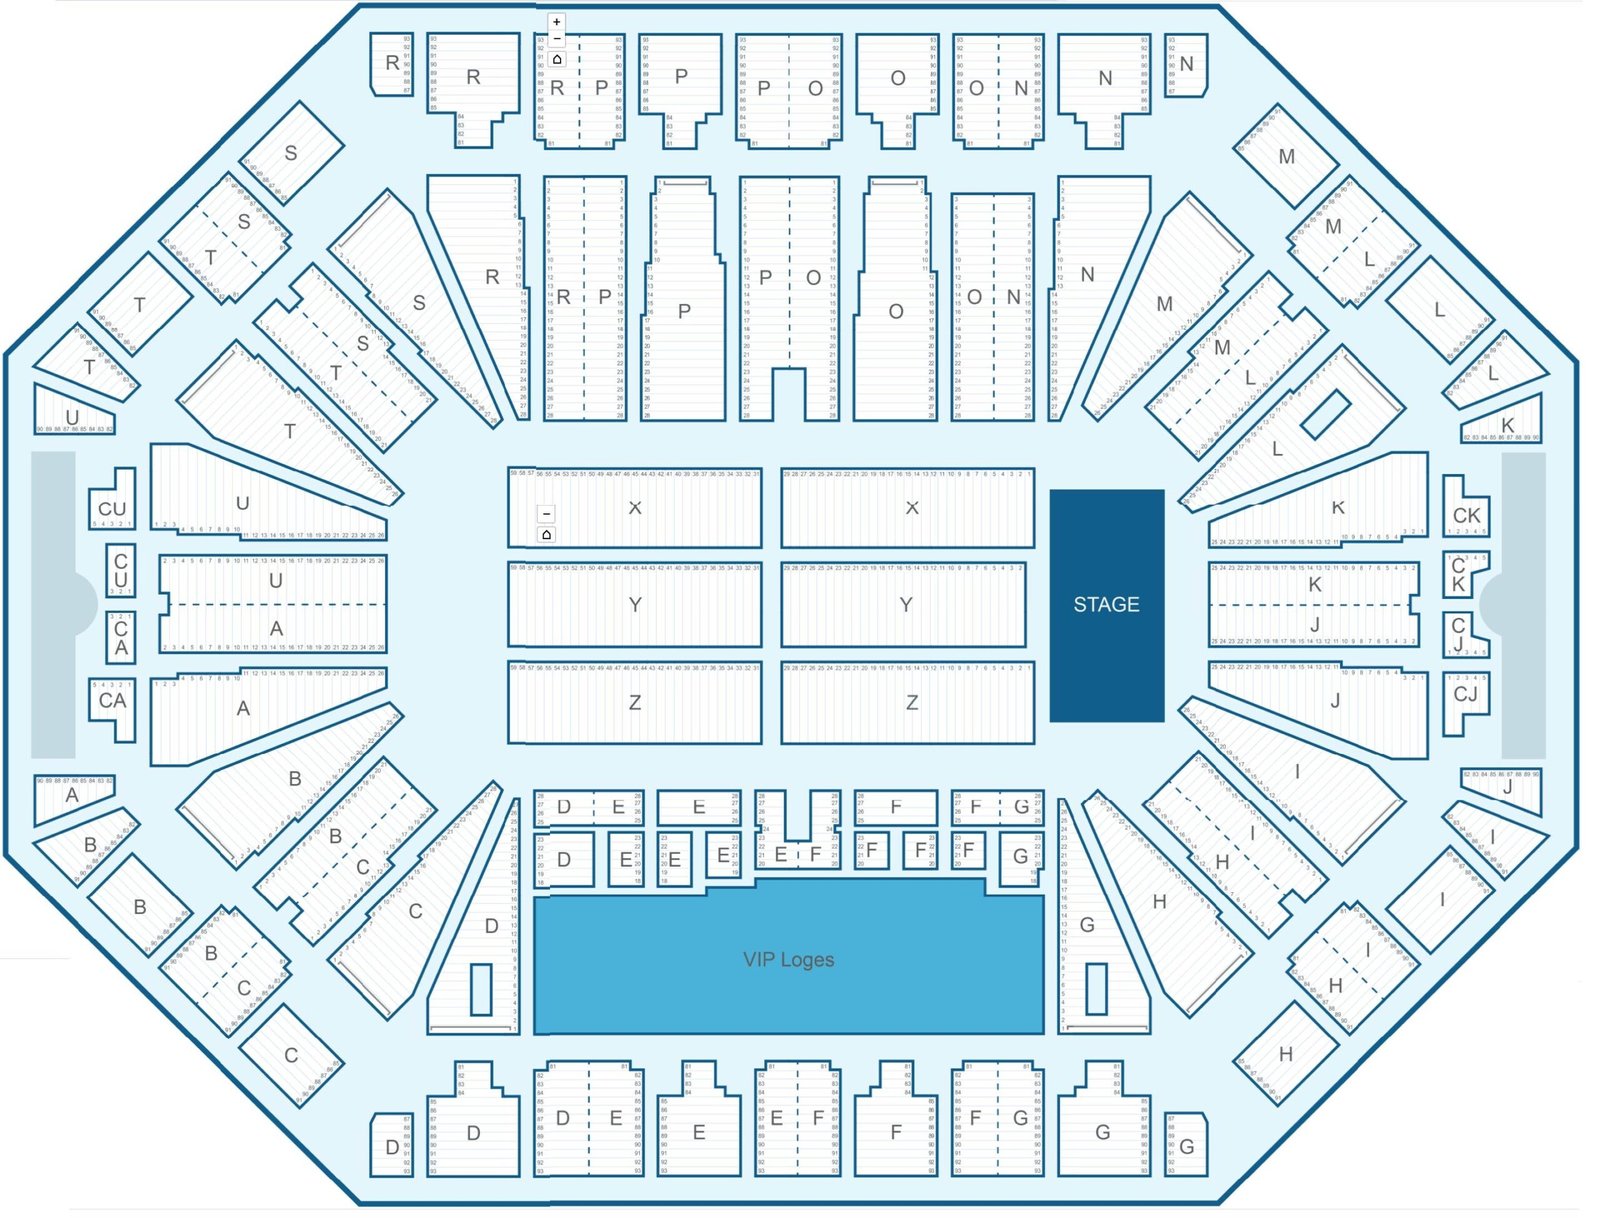 Paris Accor Arena Seating Chart With Seat Number and Rows